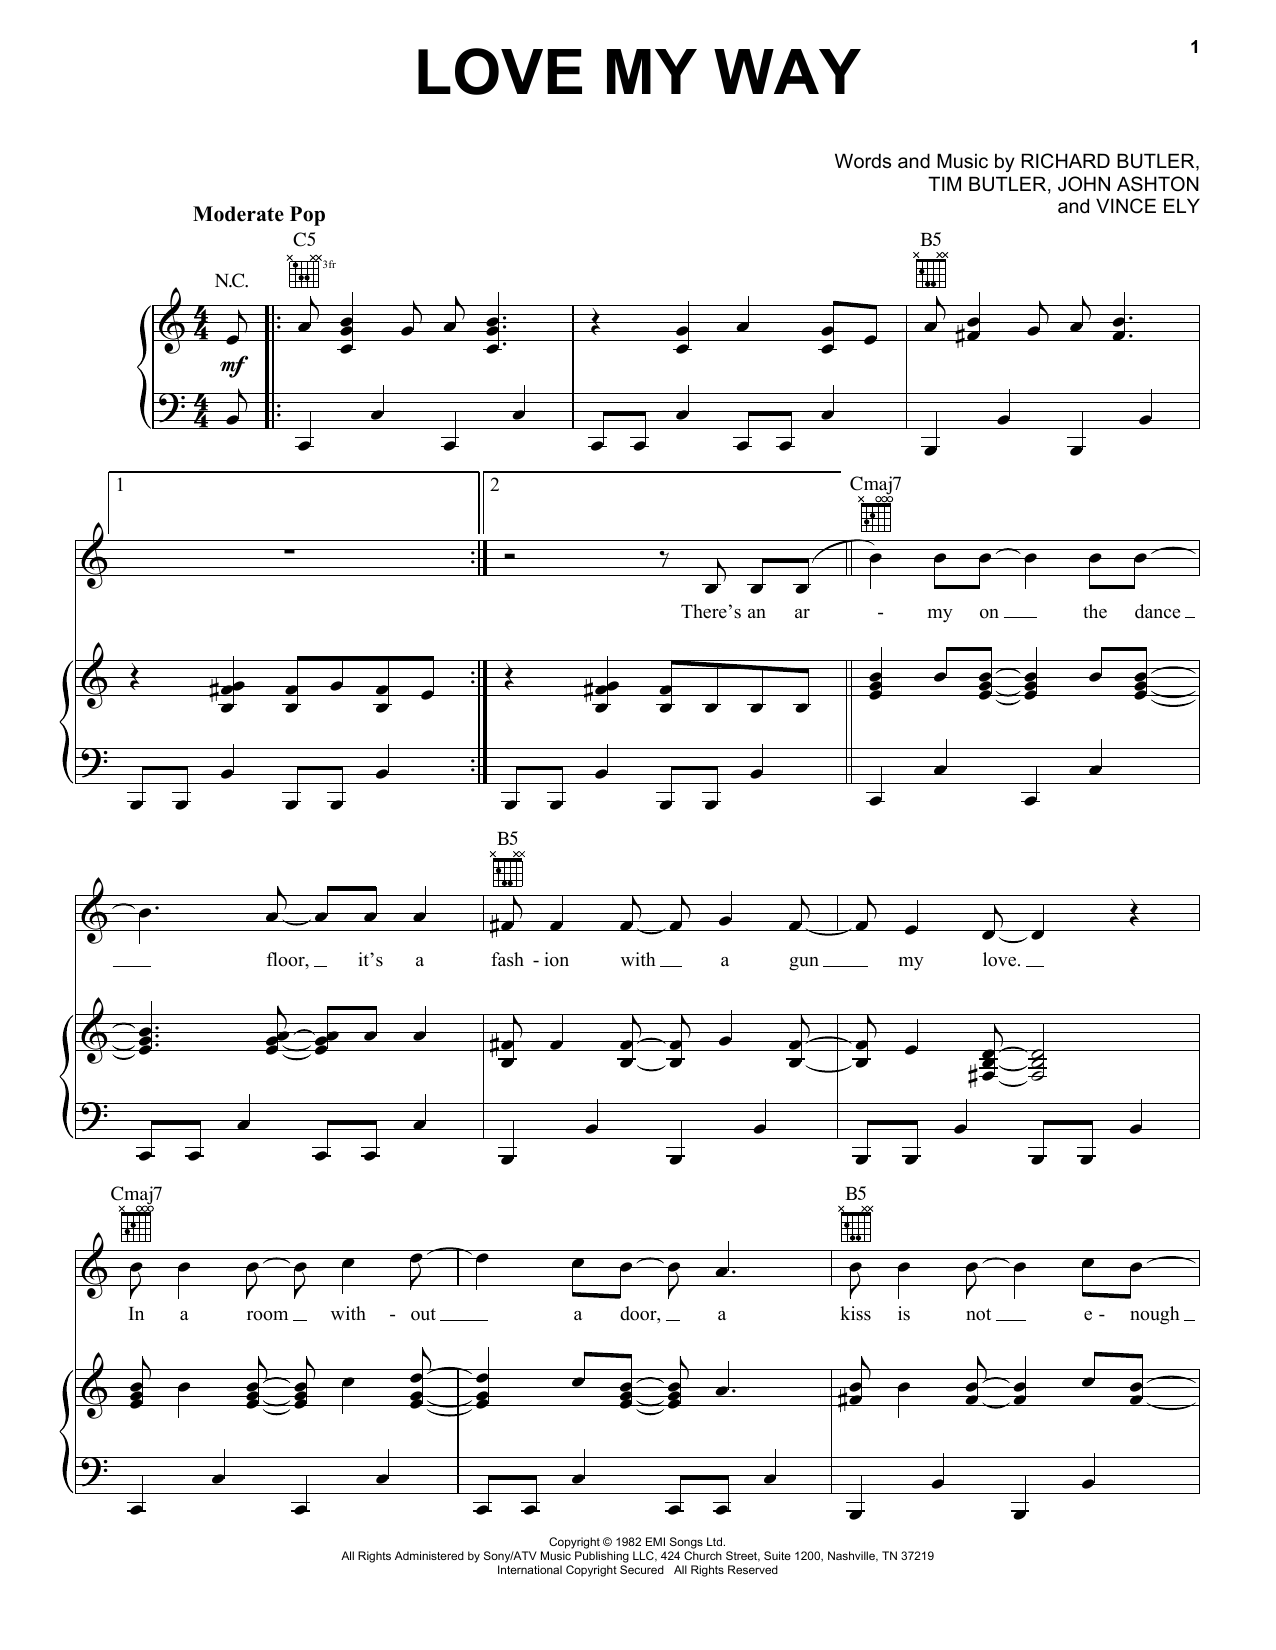 Download Psychedelic Furs Love My Way Sheet Music